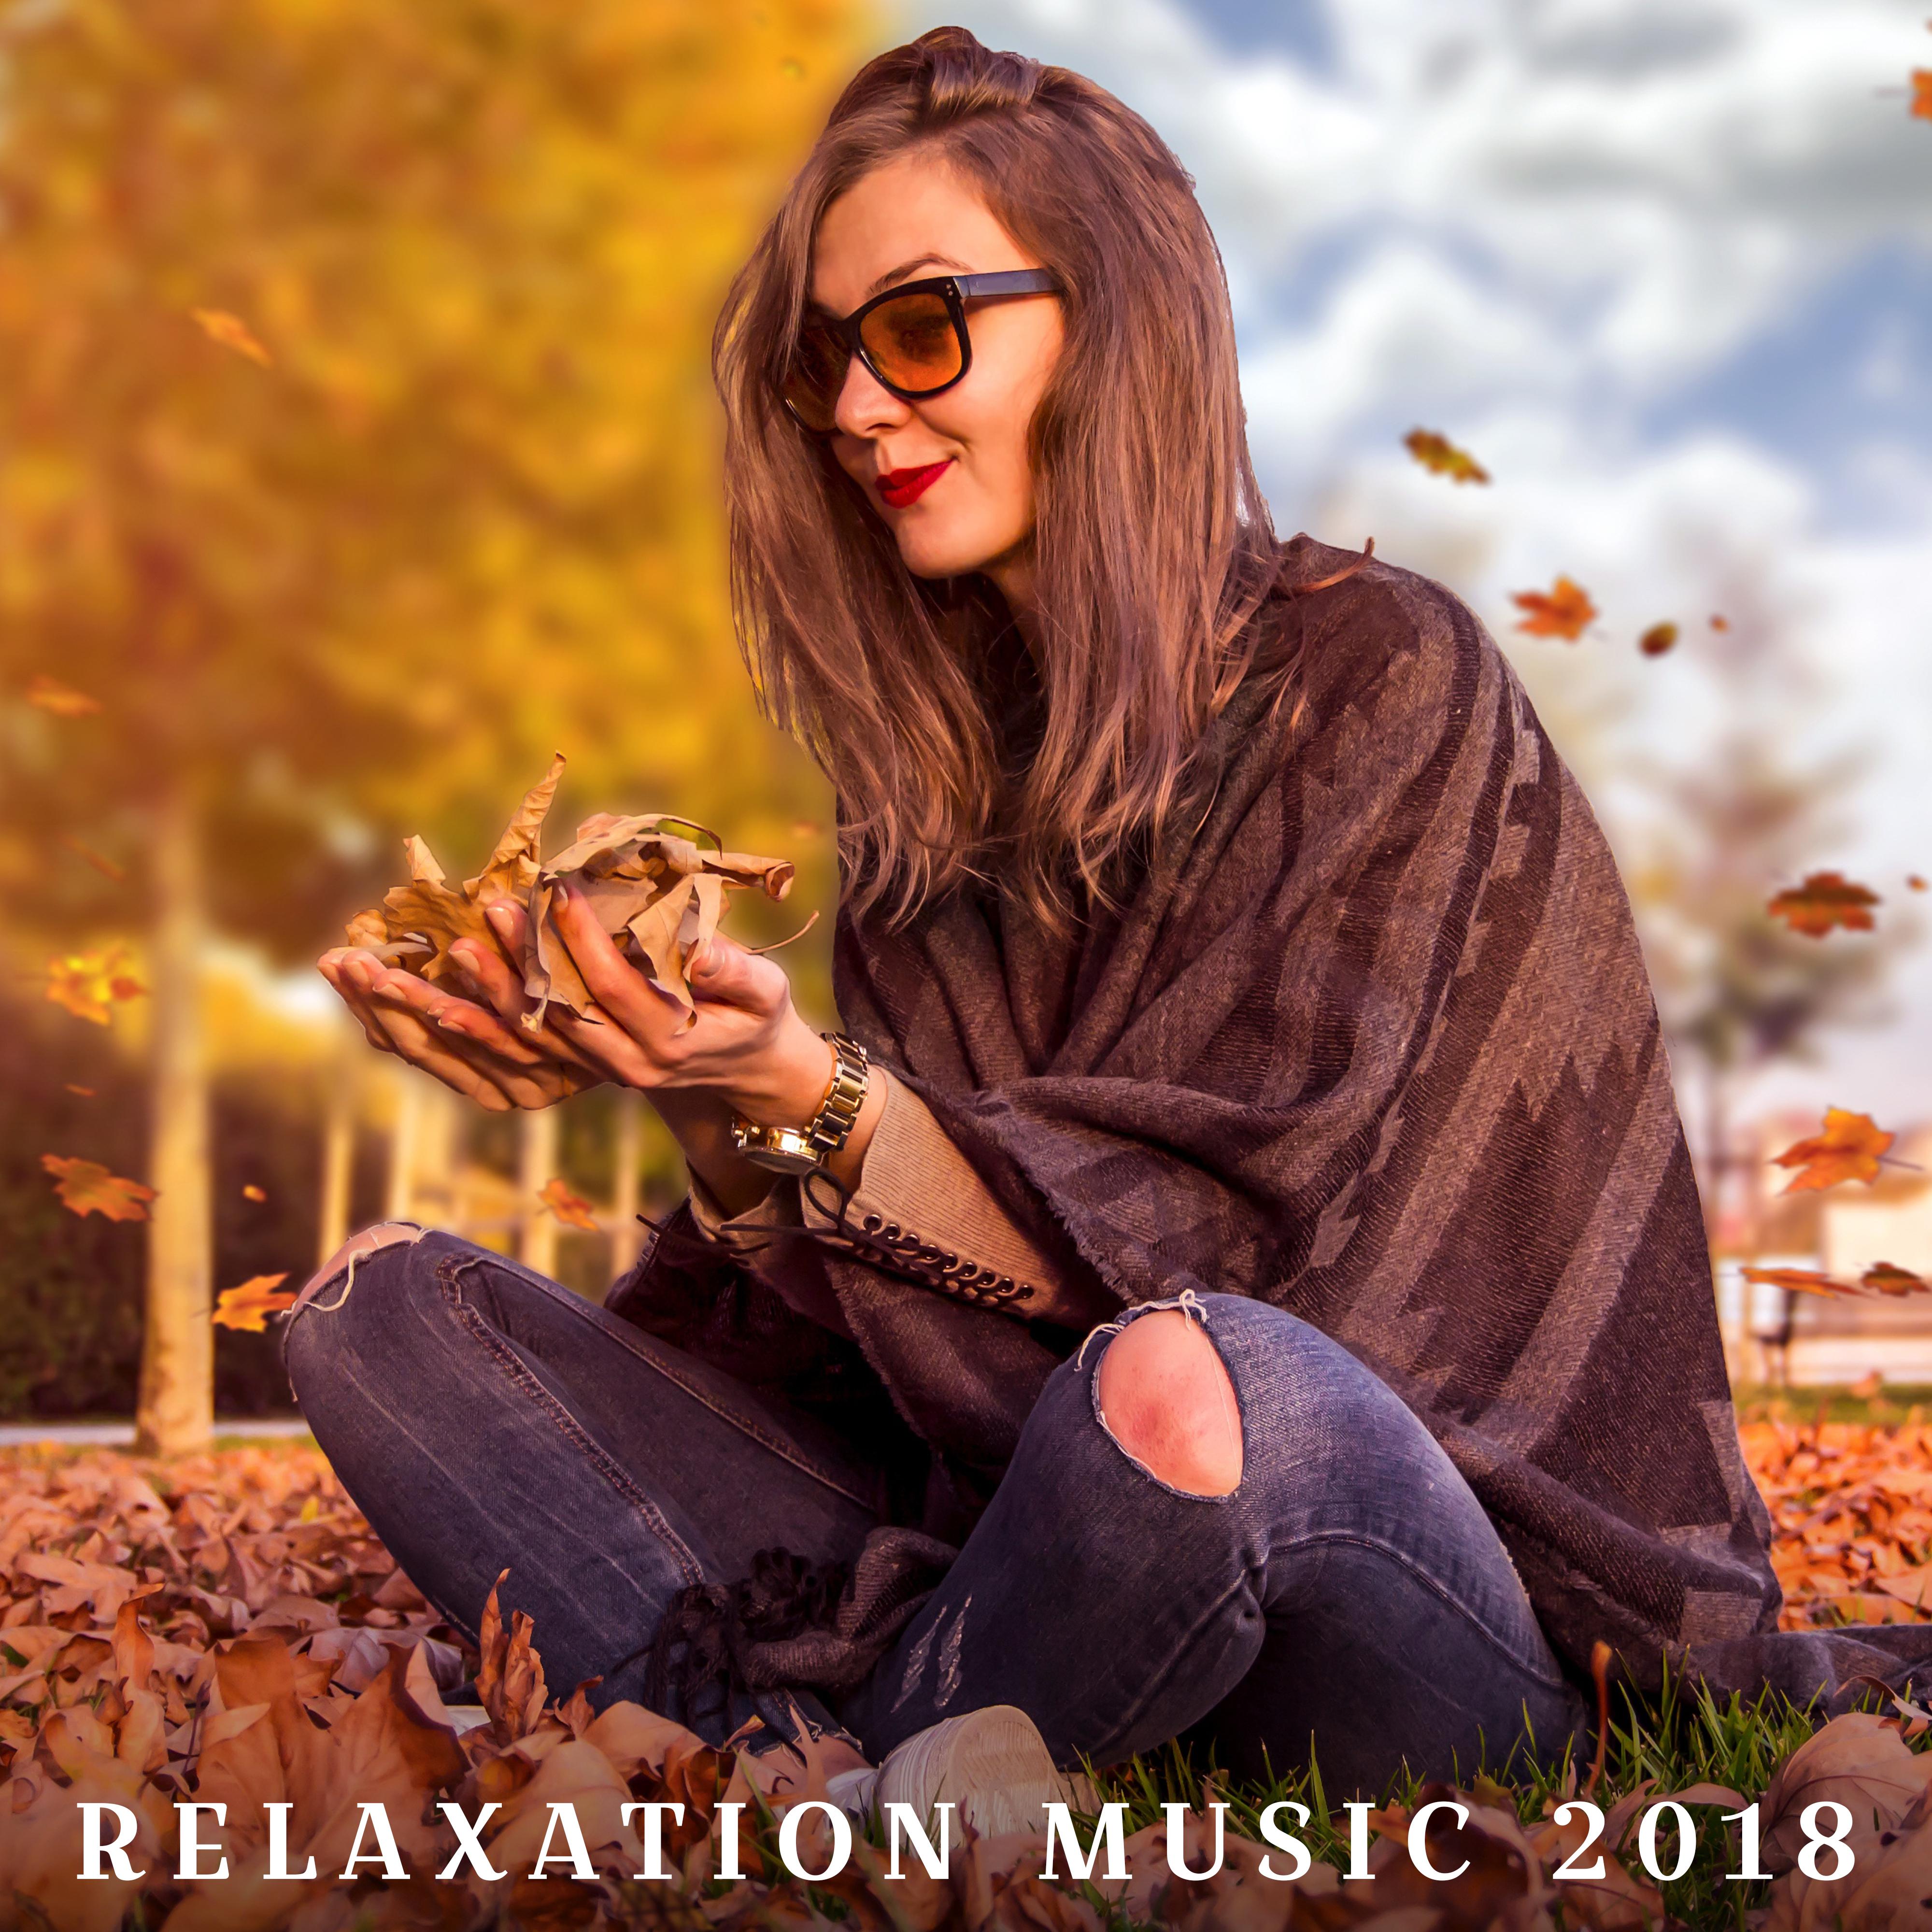 Relaxation Music 2018